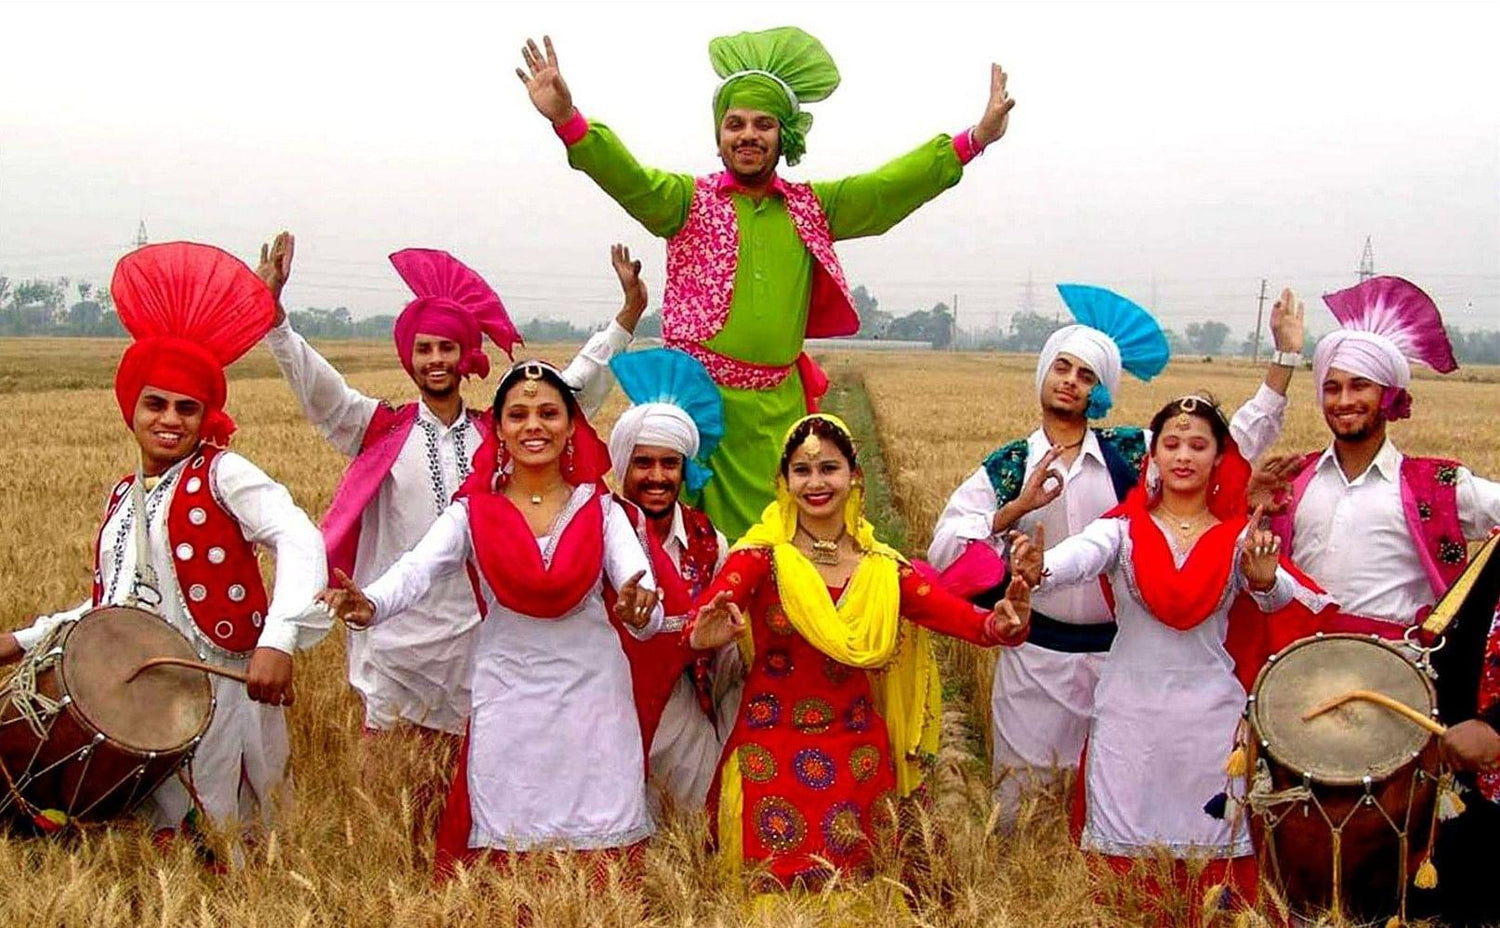 The Baisakhi Sprit - Colors And Traditions